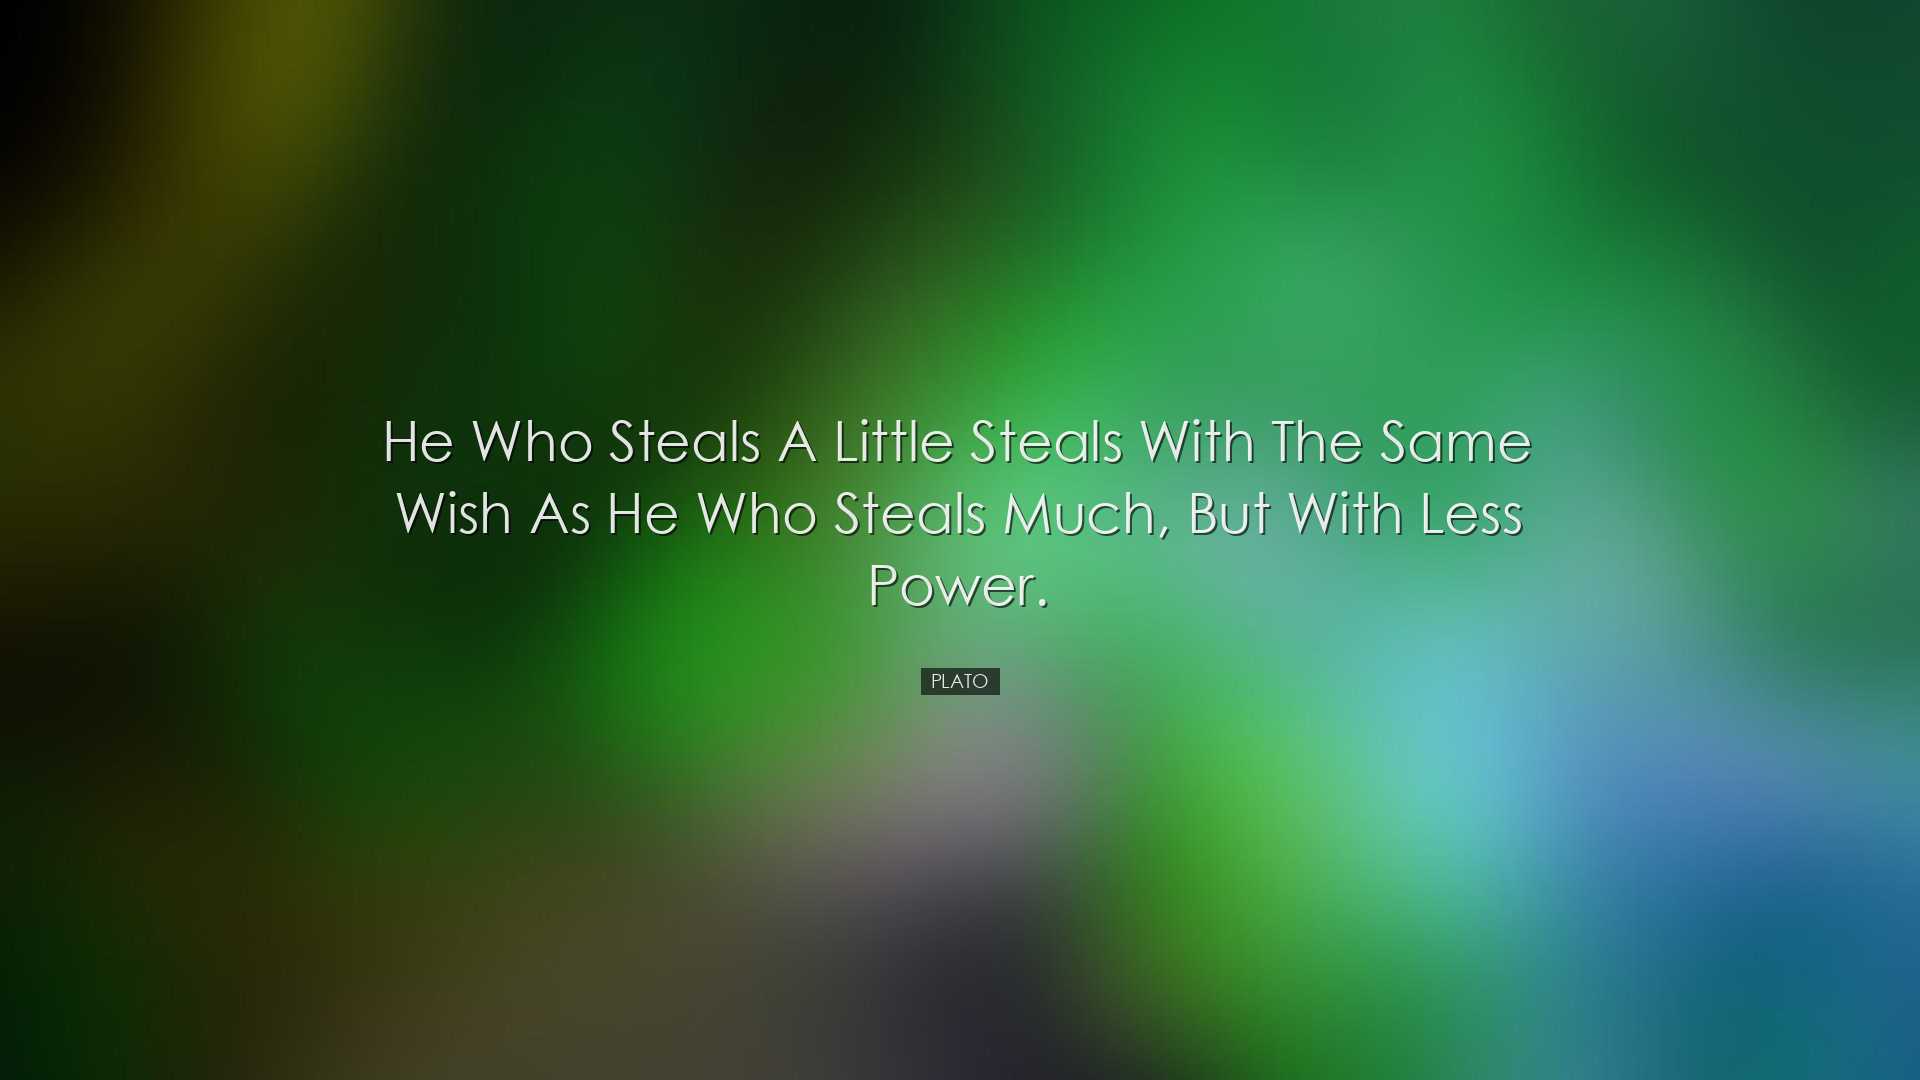 He who steals a little steals with the same wish as he who steals